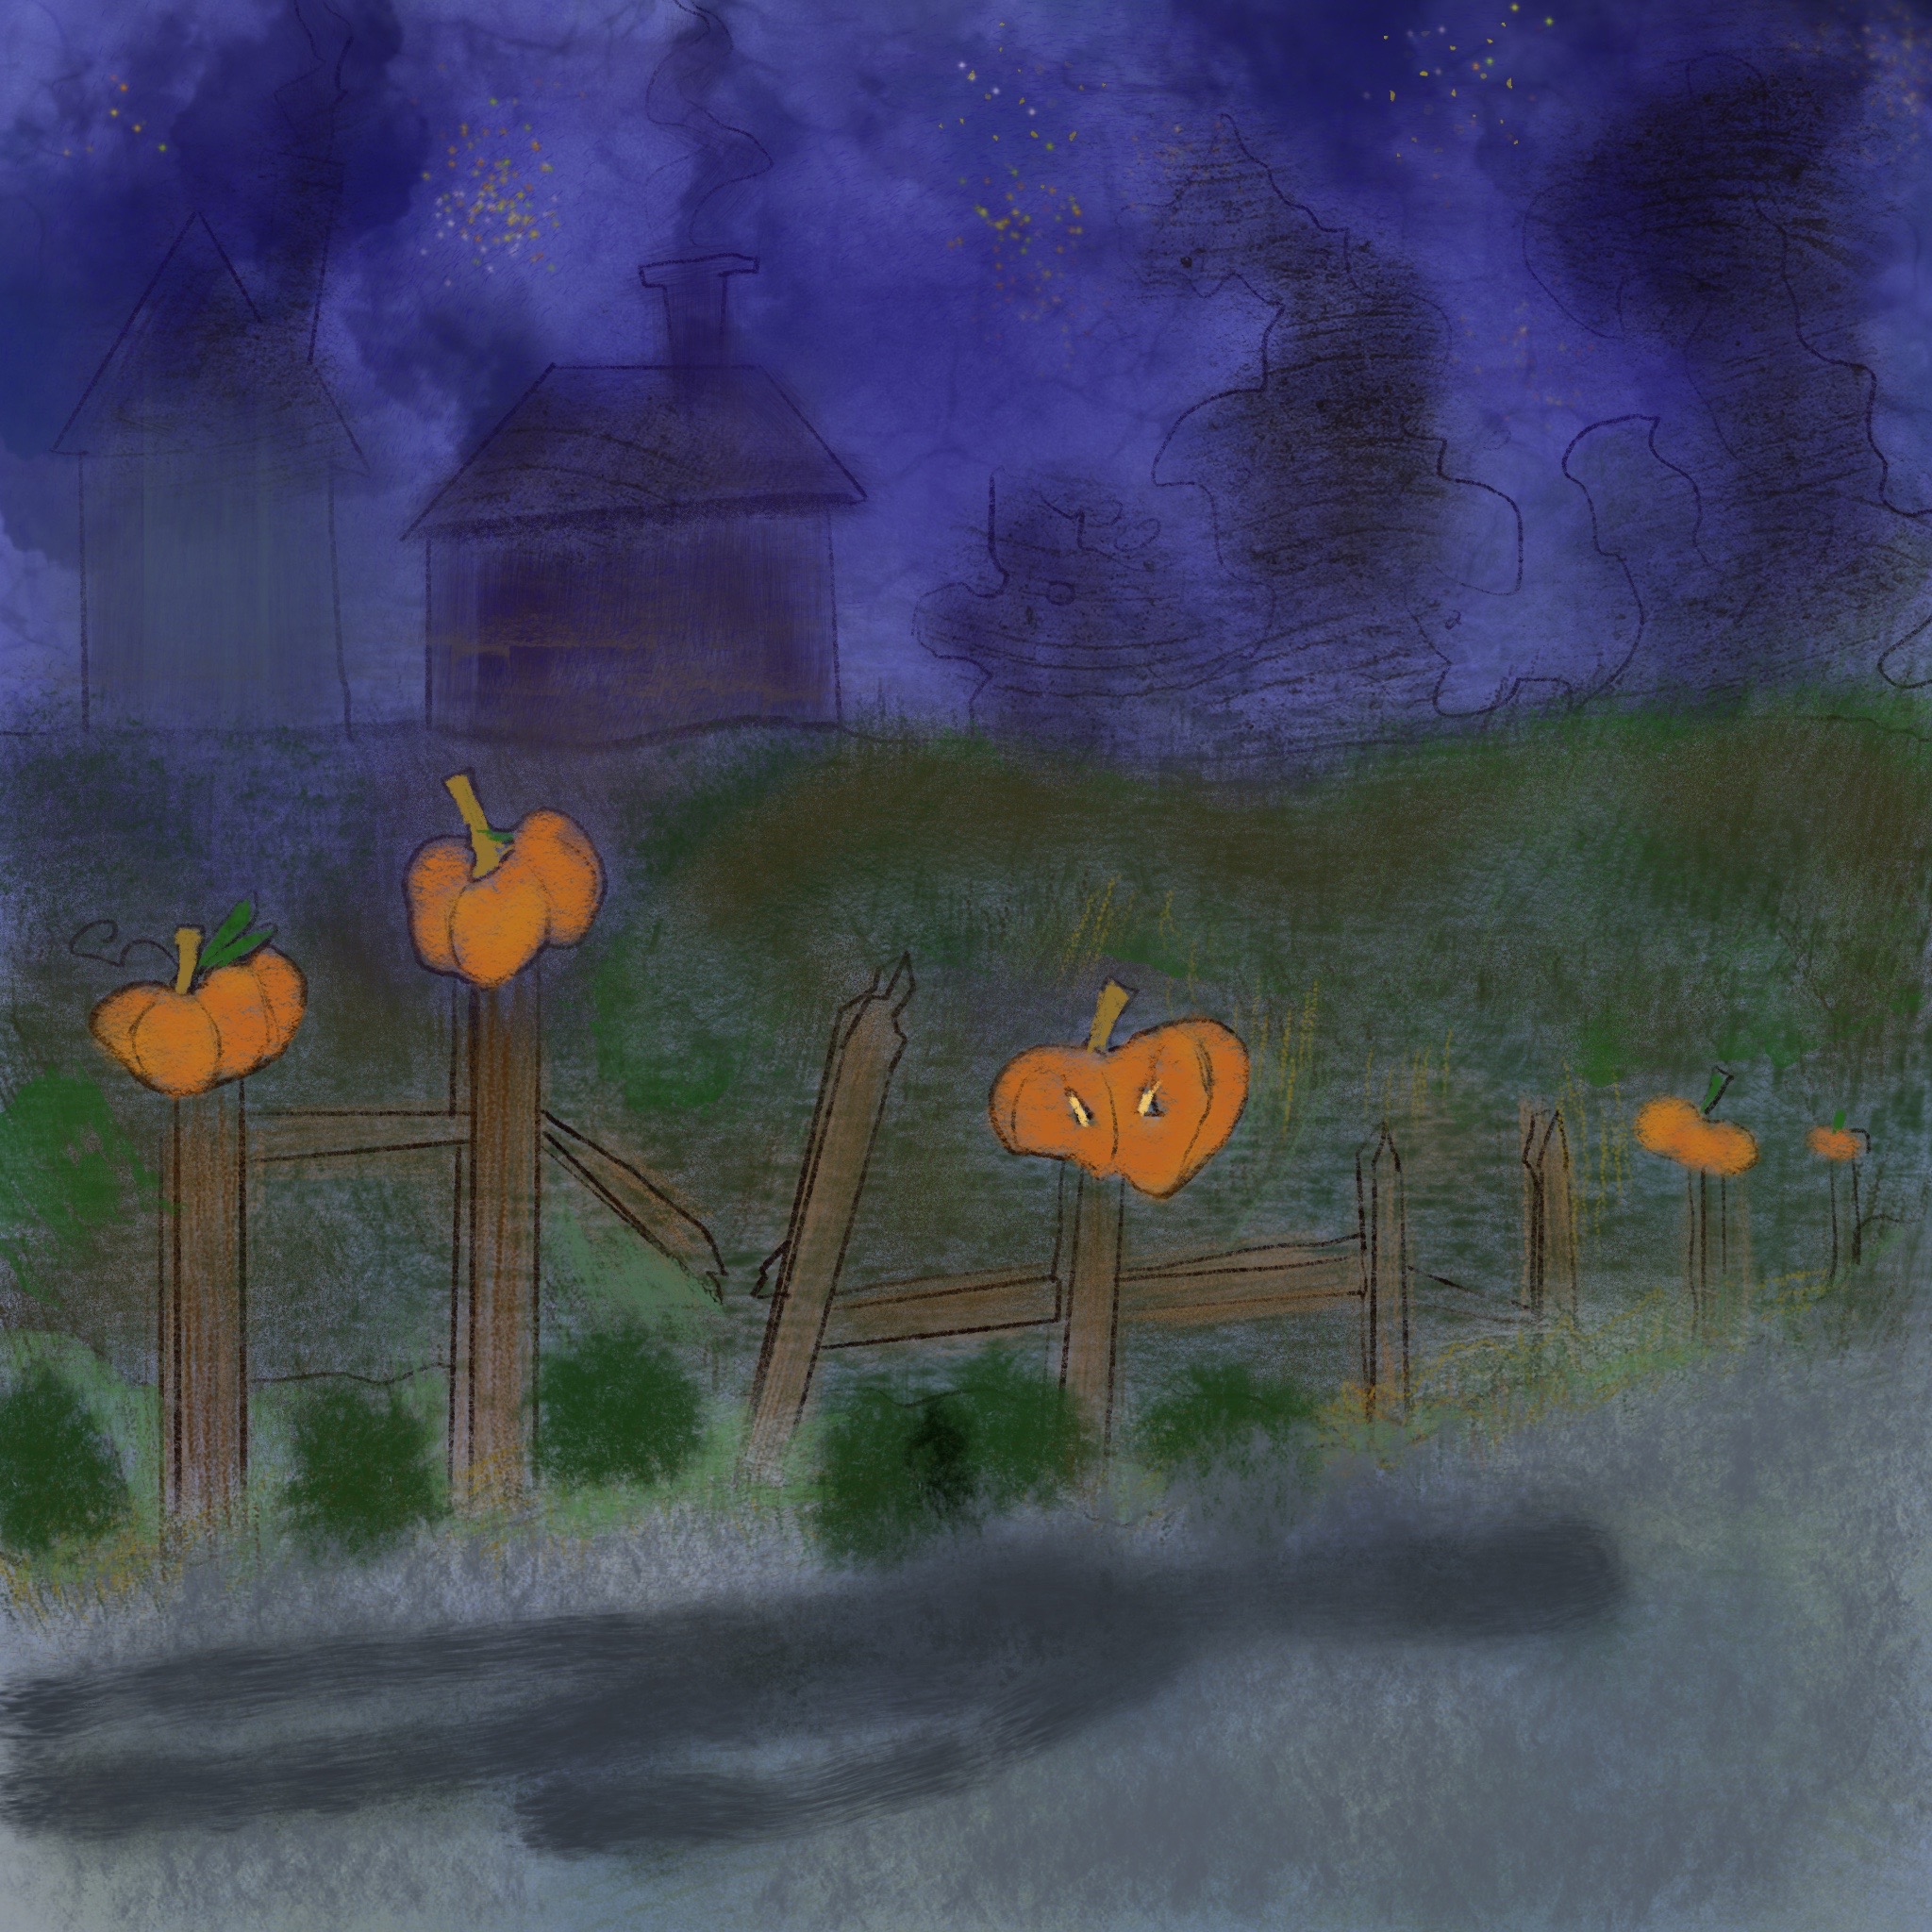 At dusk, the shadow of a person appears on the ground next to a fence lined with pumpkins. There are darkened houses in the background.